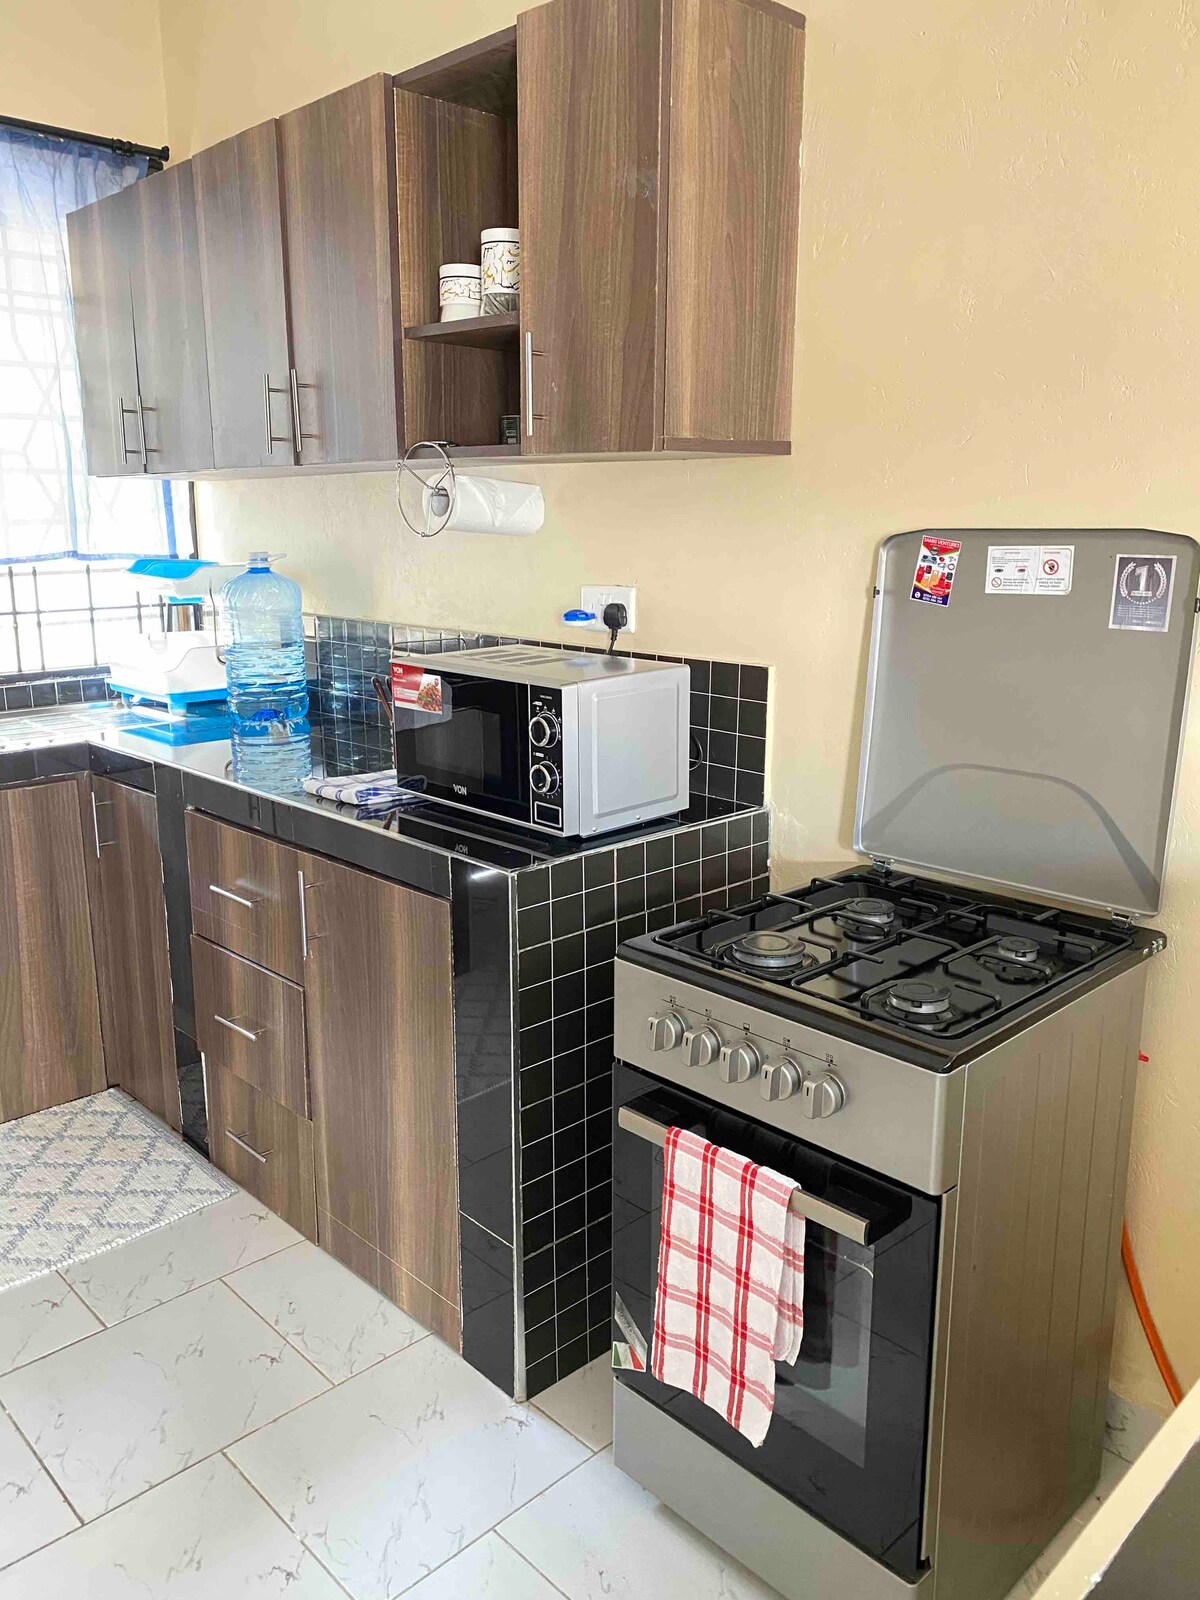 Zola 2 bedroom furnished apartment.